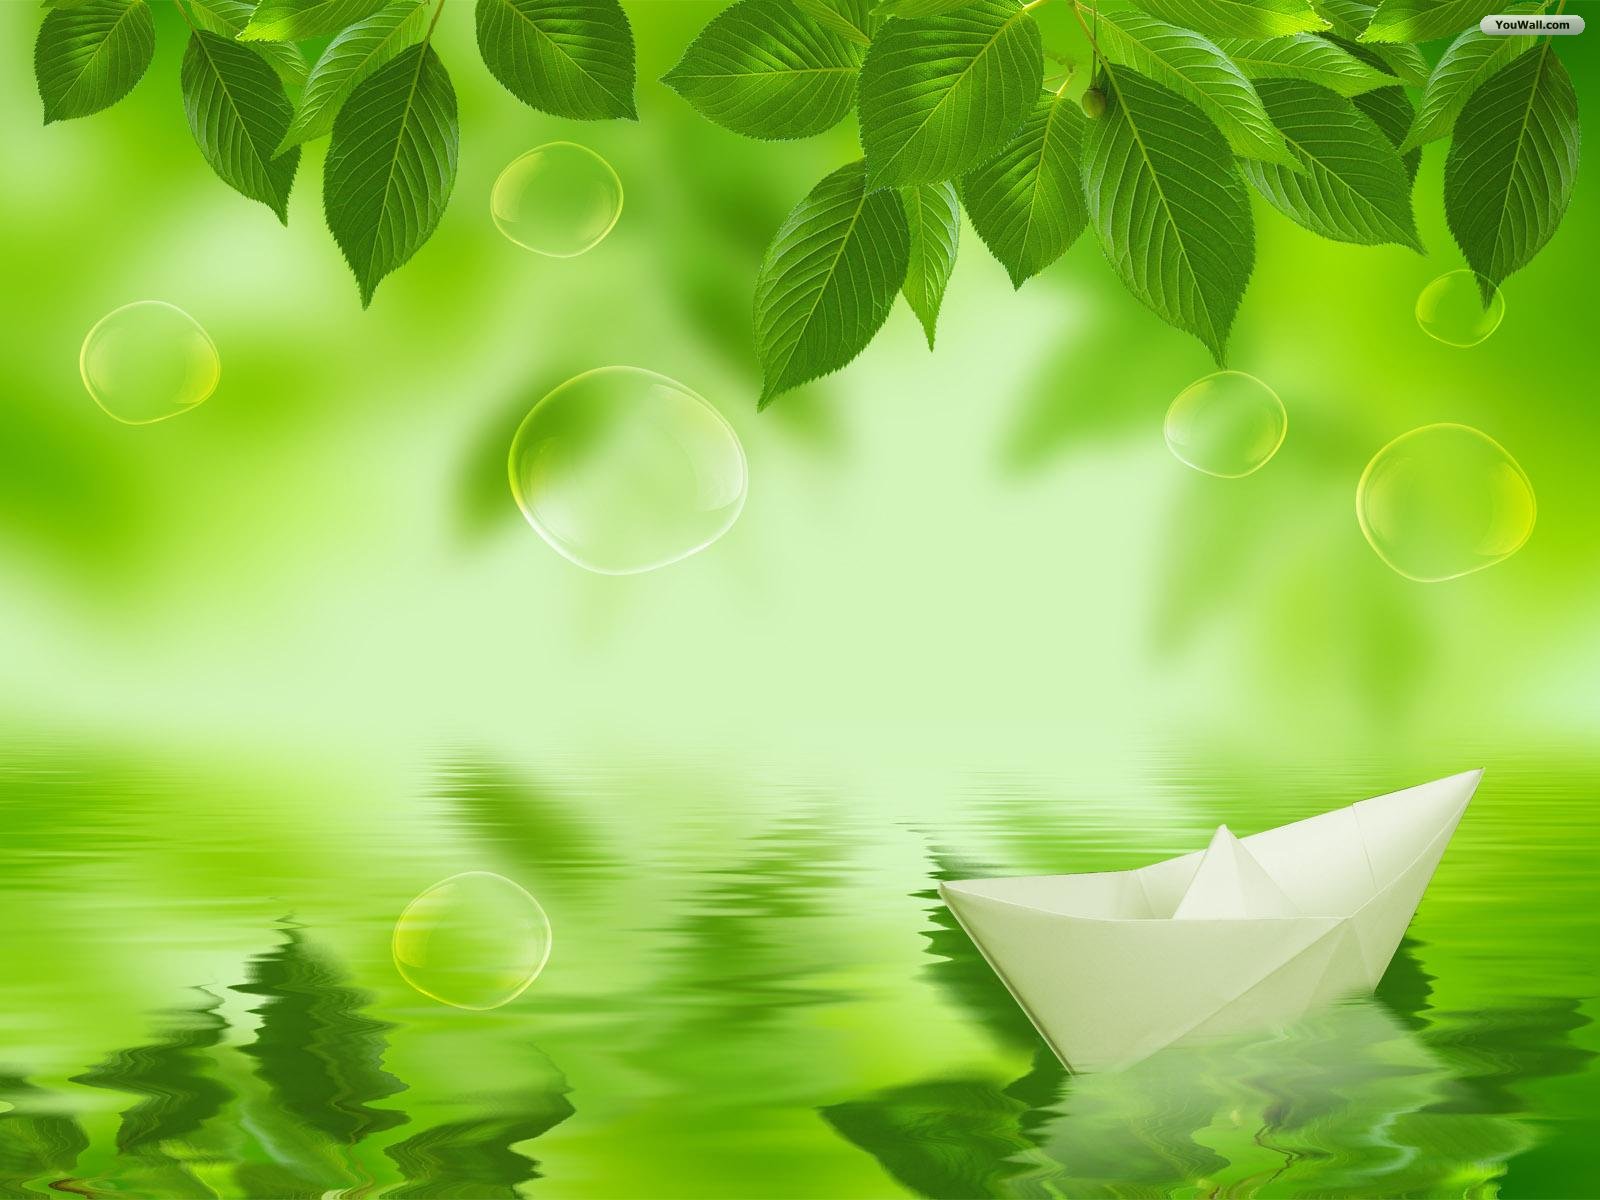 Download Green Leaves Wallpaper Backgrounds pictures in high